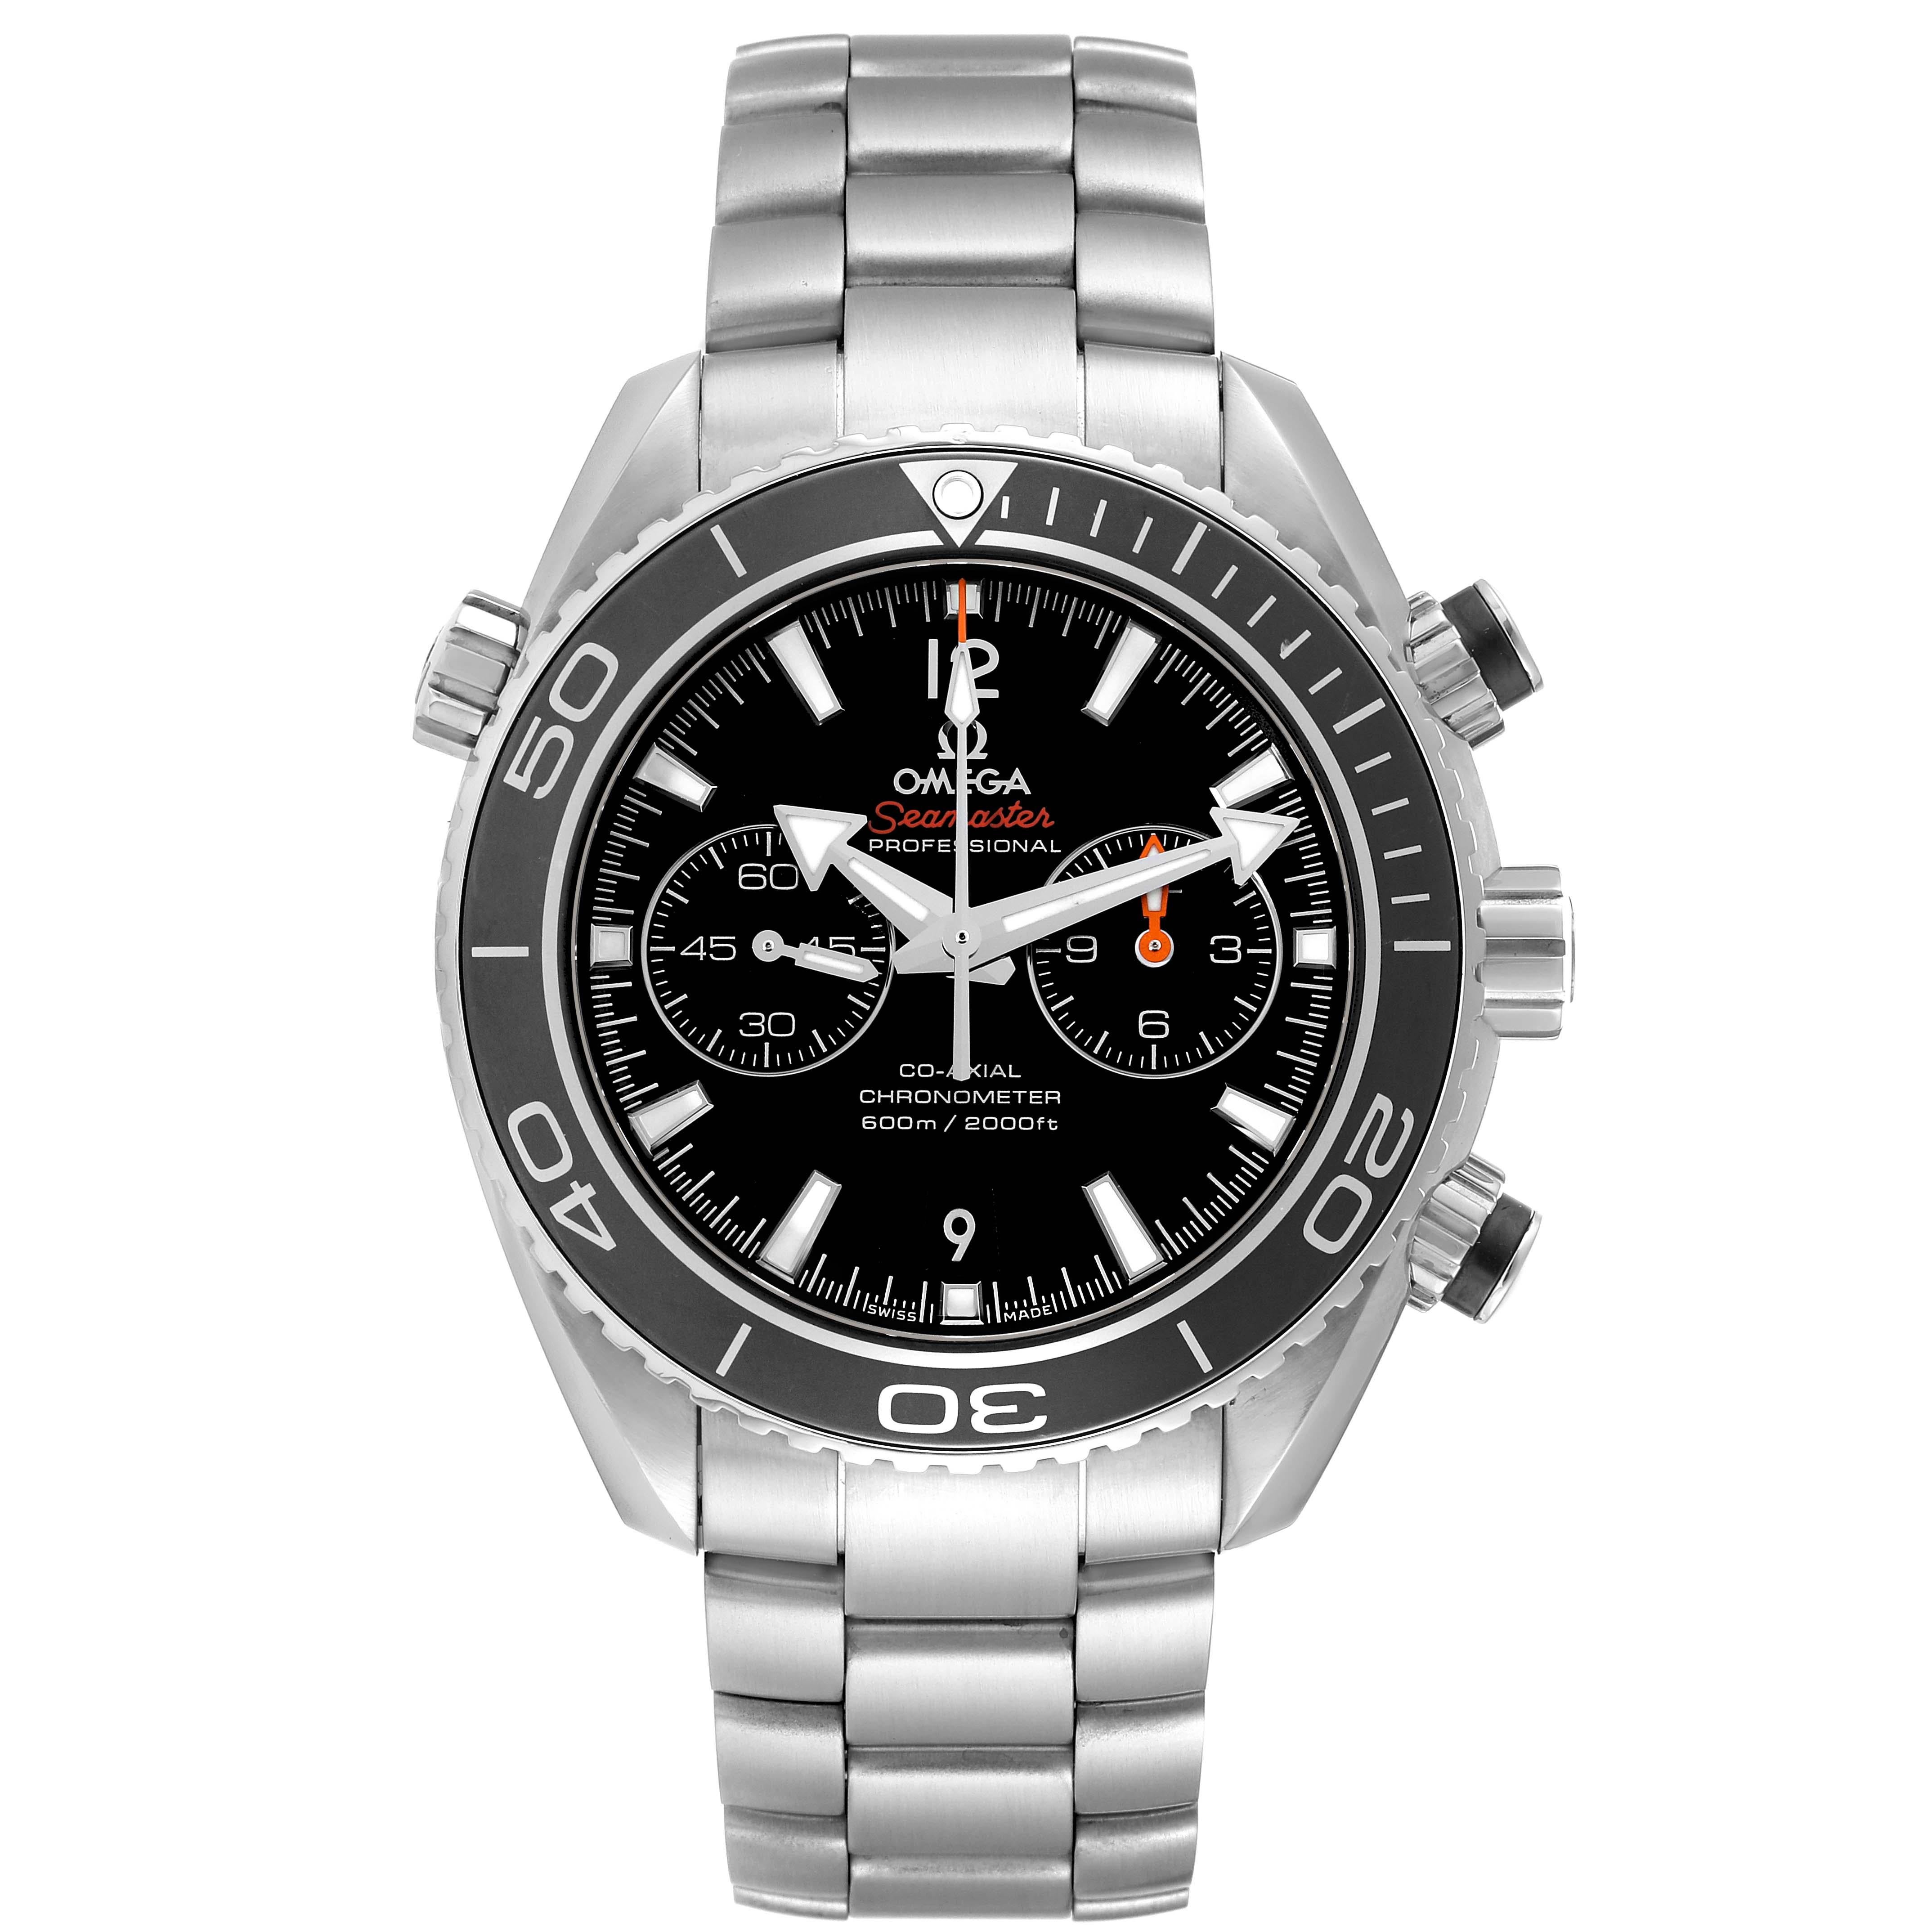 Omega Seamaster Planet Ocean 600M Steel Mens Watch 232.30.46.51.01.001 Box Card. Automatic self-winding chronograph movement with column wheel mechanism and Co-Axial Escapement for greater precision, stability and durability of the movement. Silicon